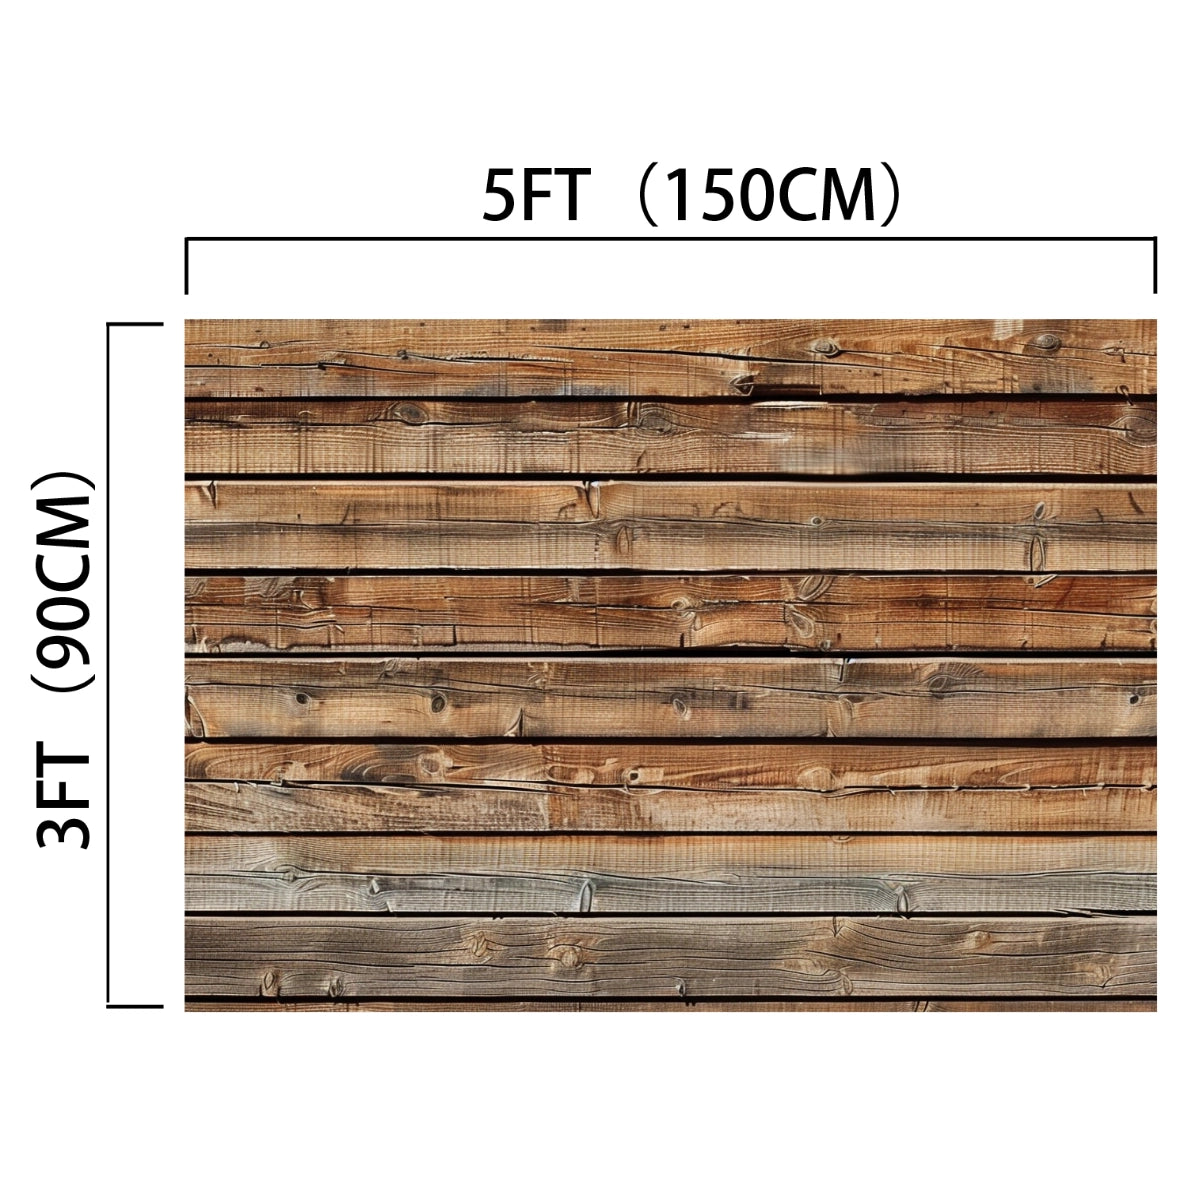 7x5ft Wood Backdrops for Photography Worn Wooden Boards Background Brown Photo Wall Photo Studio by ideasbackdrop, measuring 5 feet (150 cm) in width and 3 feet (90 cm) in height, perfect as a wood wall backdrop for your next photoshoot.